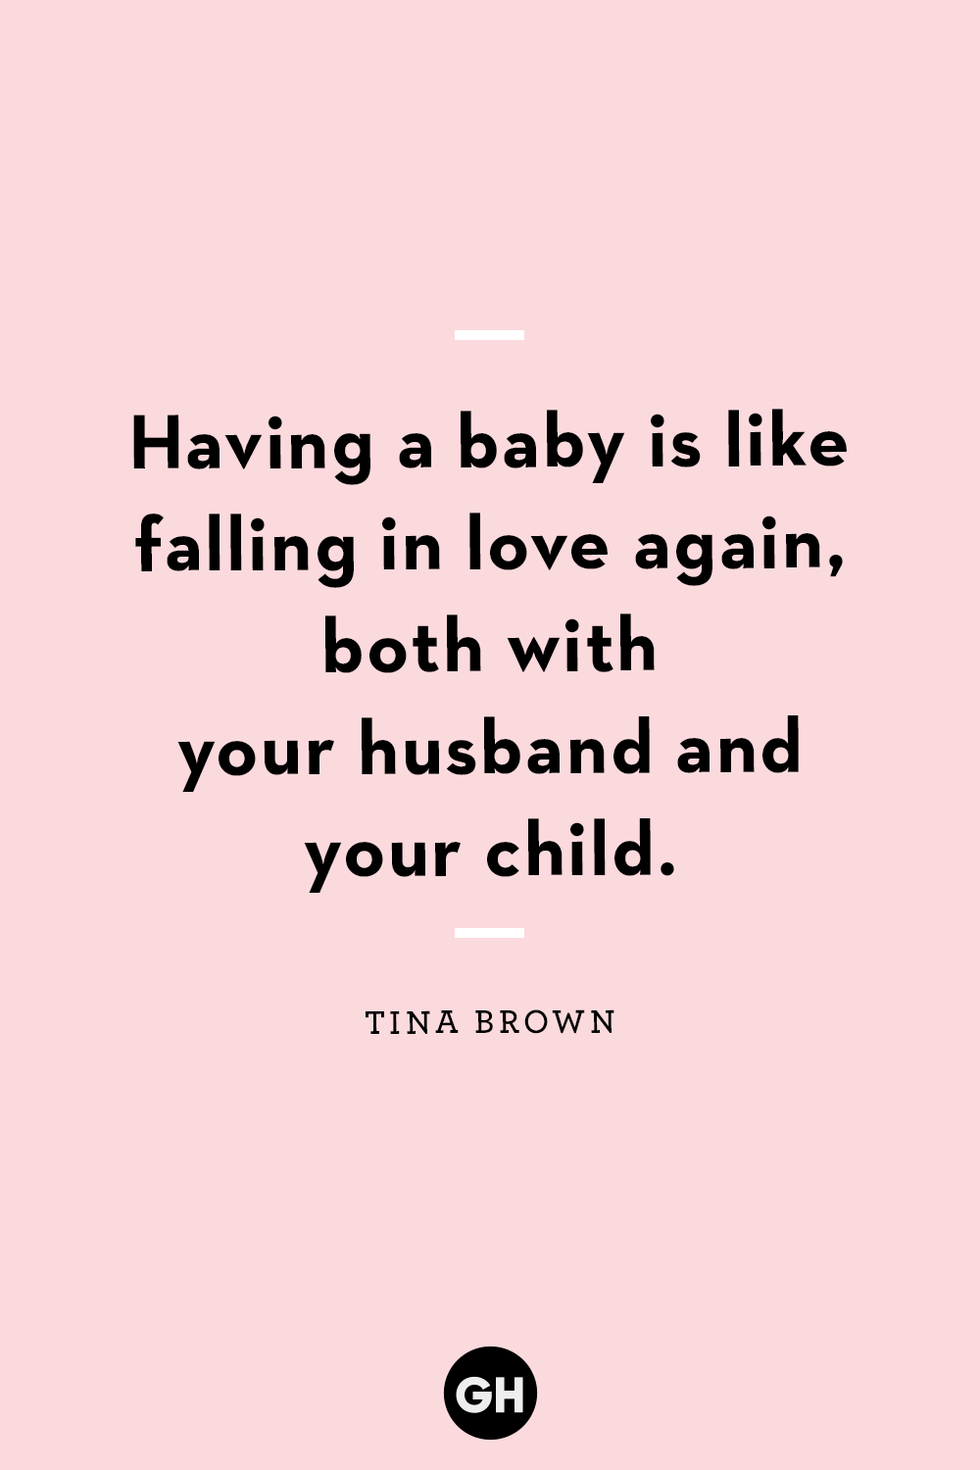 having a baby is like falling in love again, both with your husband and your child